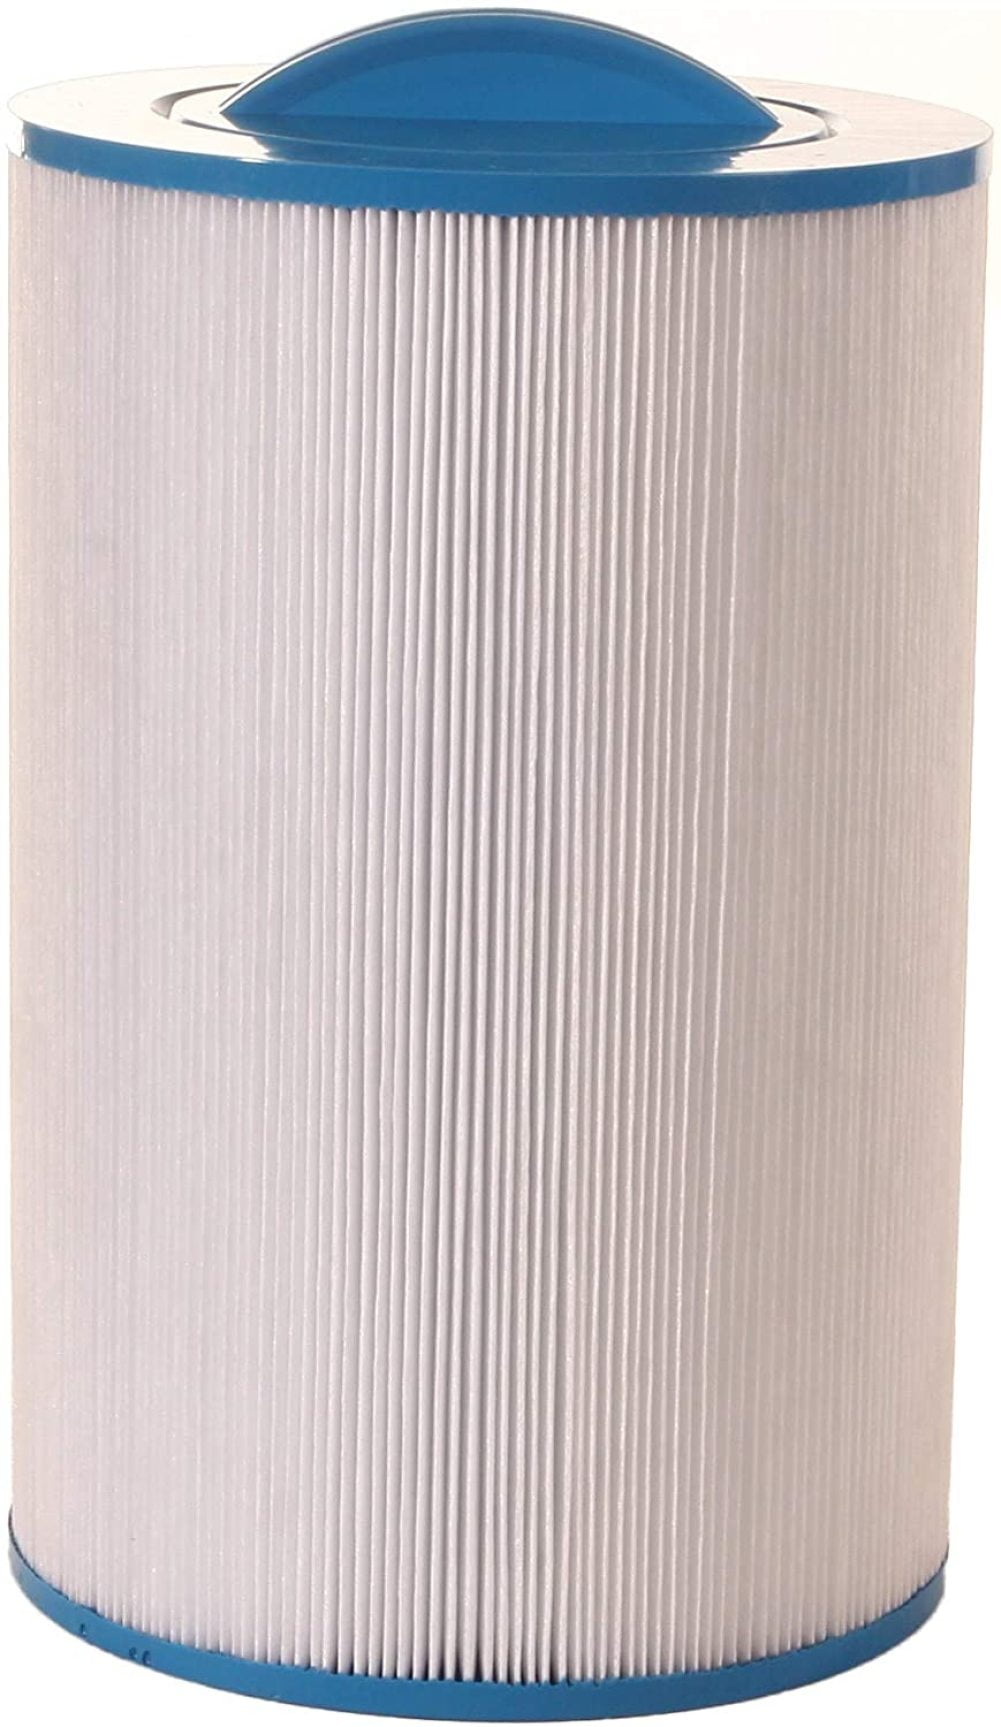 Baleen Filters 65 sq ft Filbur FC-2971-Pool and Spa Filter Cartridges Model: AK-40081 Pleatco PLBS75 Pool Filter Replaces Unicel C-5374 